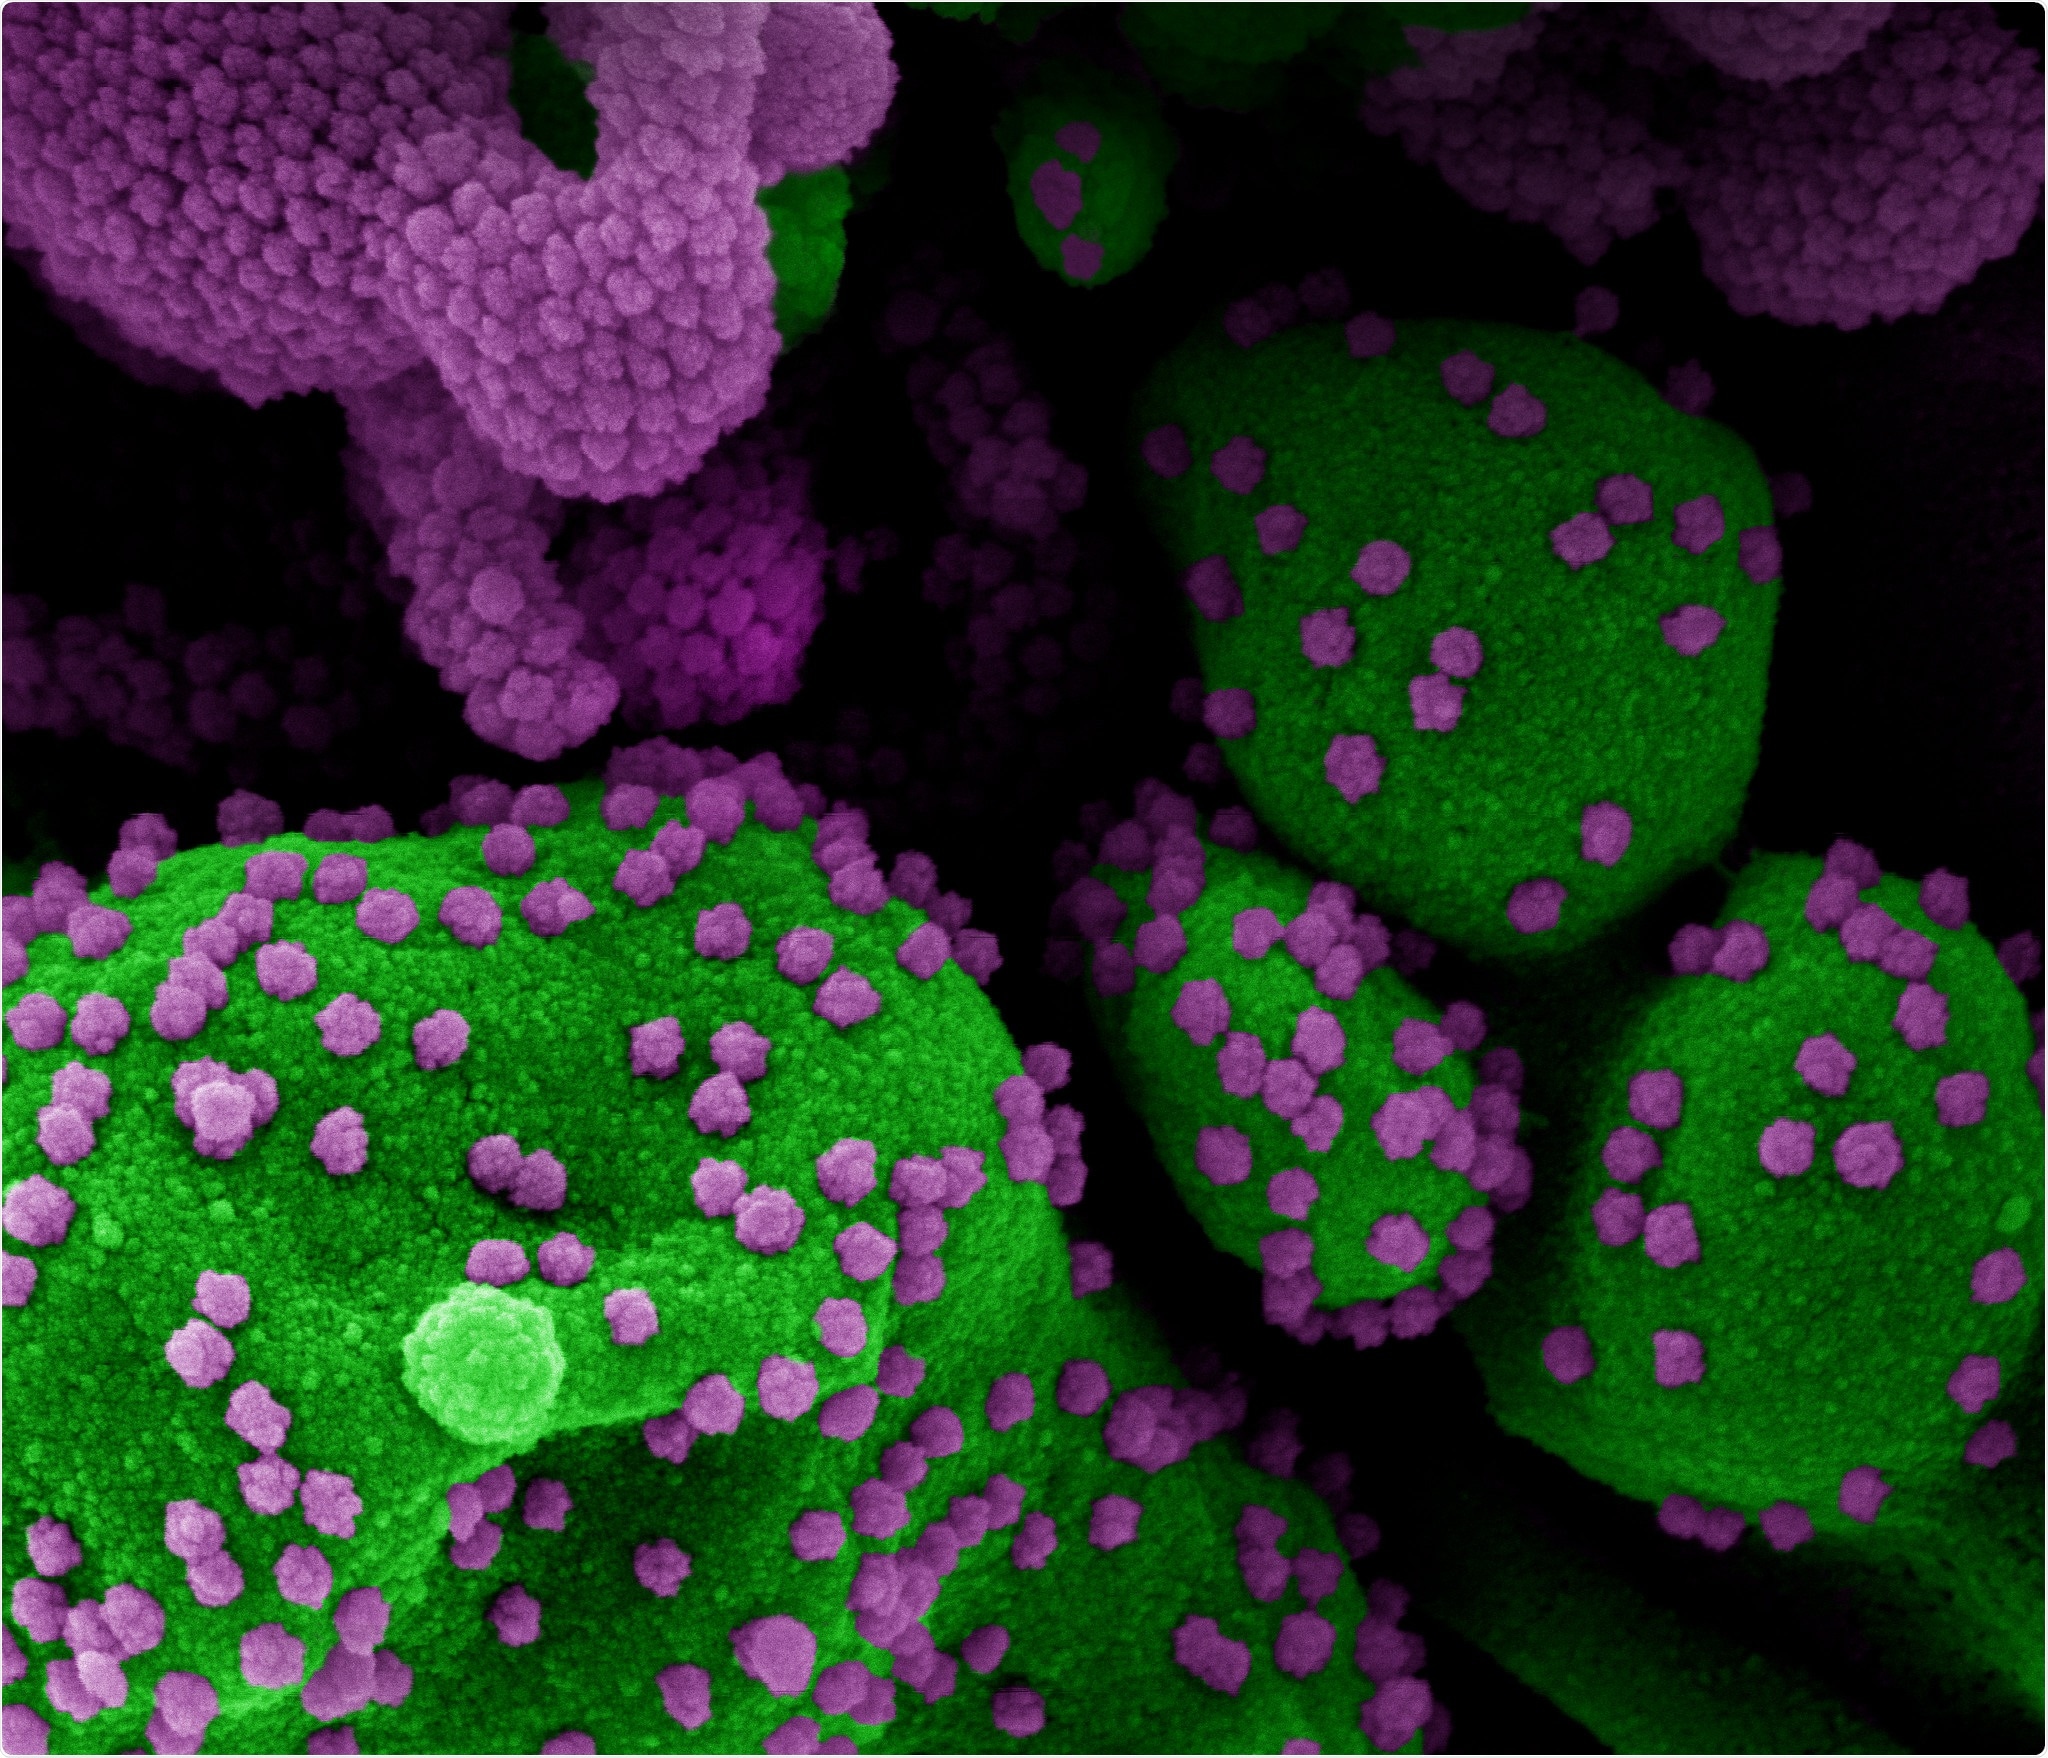 Colorized scanning electron micrograph of an apoptotic cell (green) heavily infected with SARS-CoV-2 virus particles (purple), isolated from a patient sample. Image at the NIAID Integrated Research Facility (IRF) in Fort Detrick, Maryland. Credit: NIAID